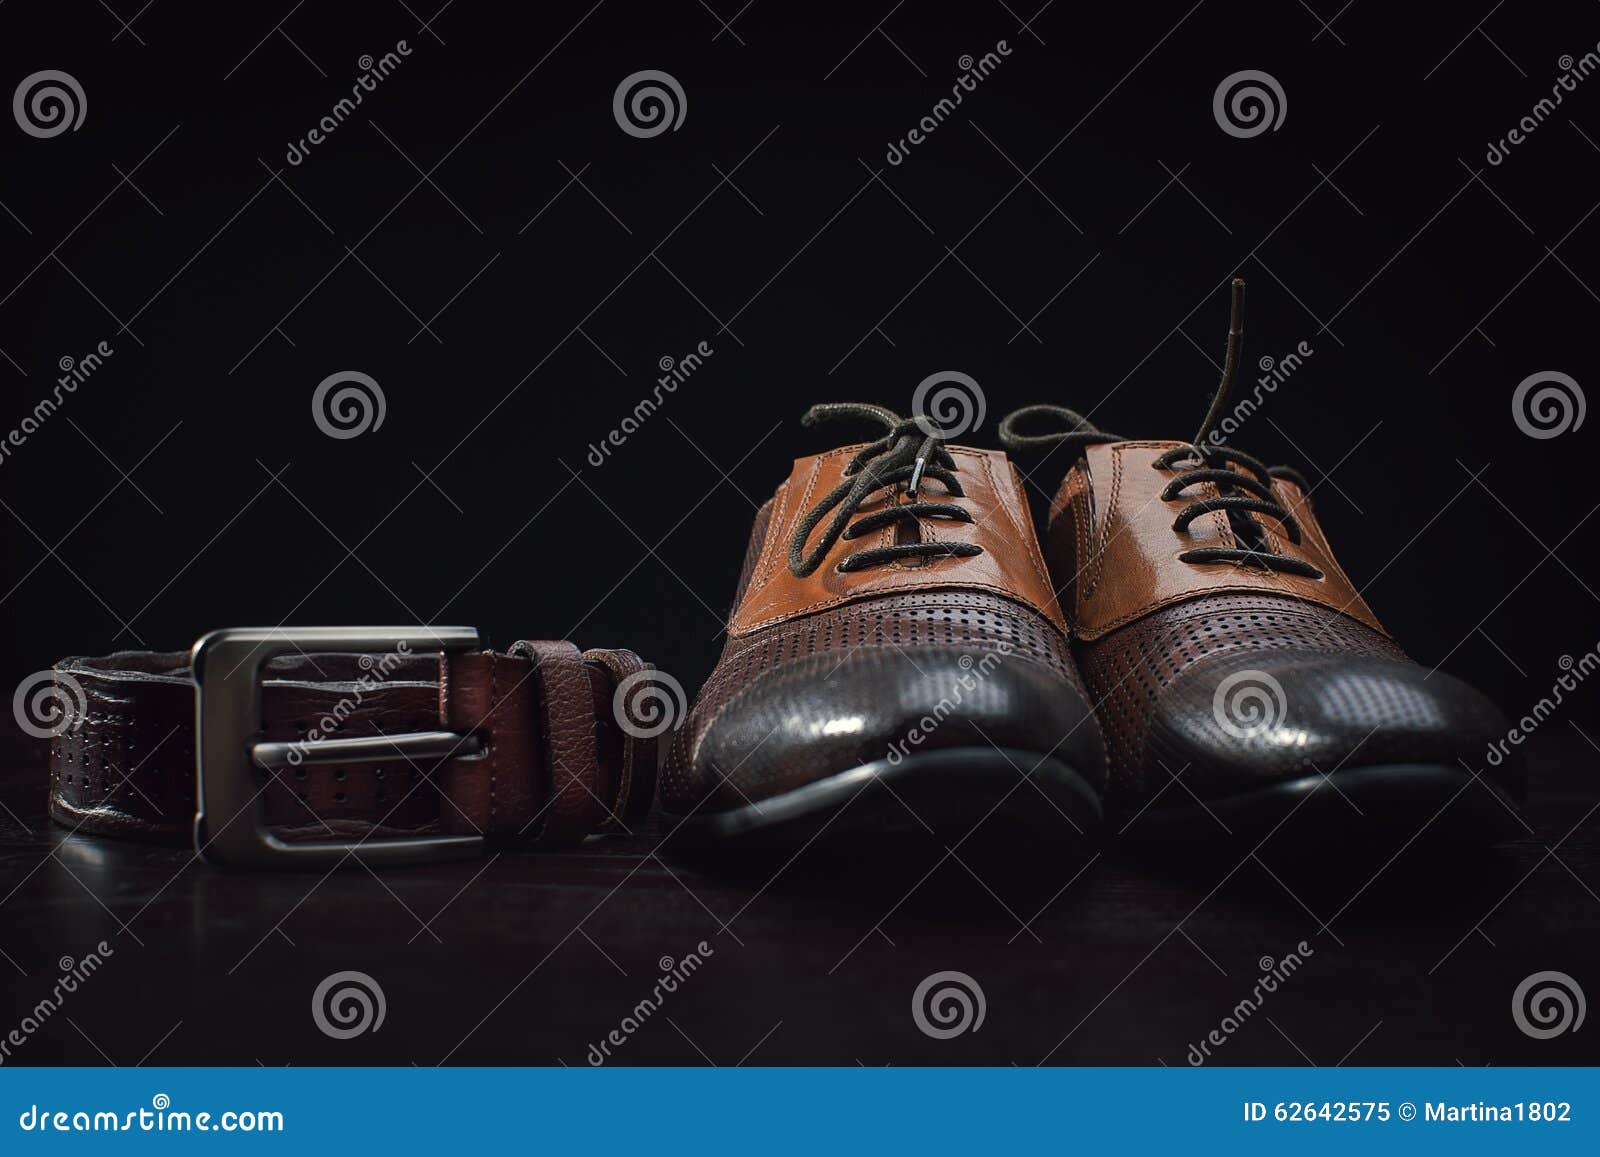 Leather Men S Dress Shoes and Belt Stock Image - Image of closeup ...